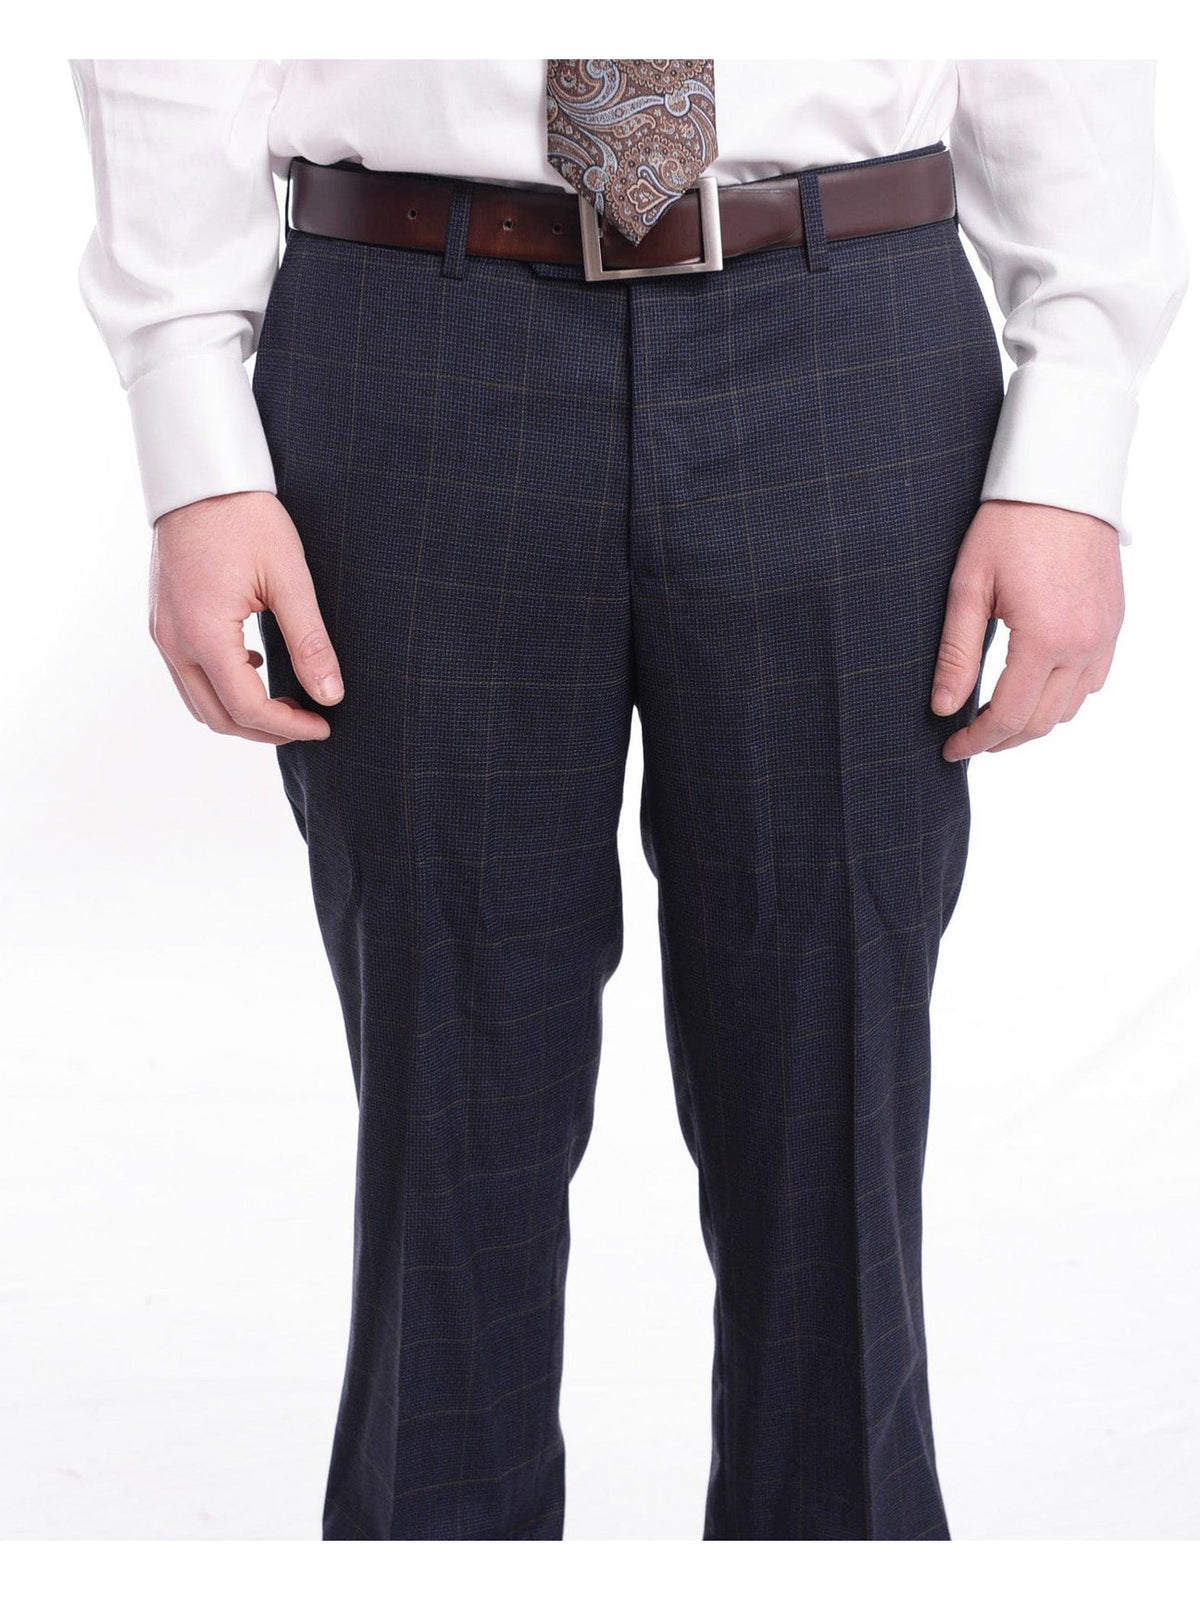 Napoli TWO PIECE SUITS Napoli Slim Fit Blue Plaid with Brown Overcheck Half Canvassed Wool Suit